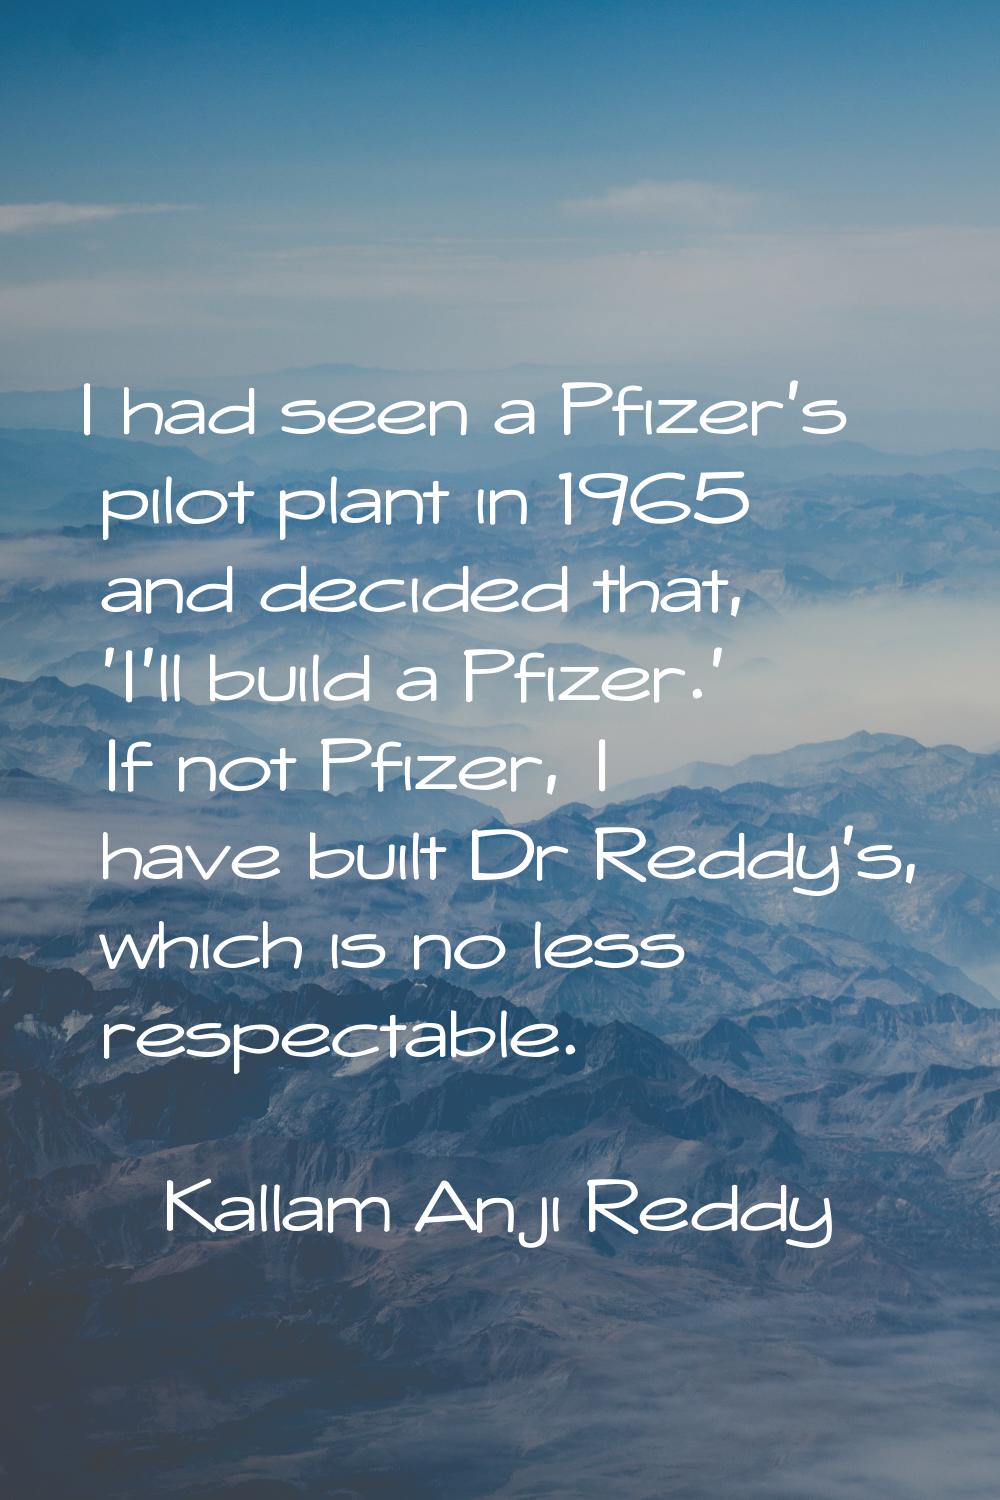 I had seen a Pfizer's pilot plant in 1965 and decided that, 'I'll build a Pfizer.' If not Pfizer, I